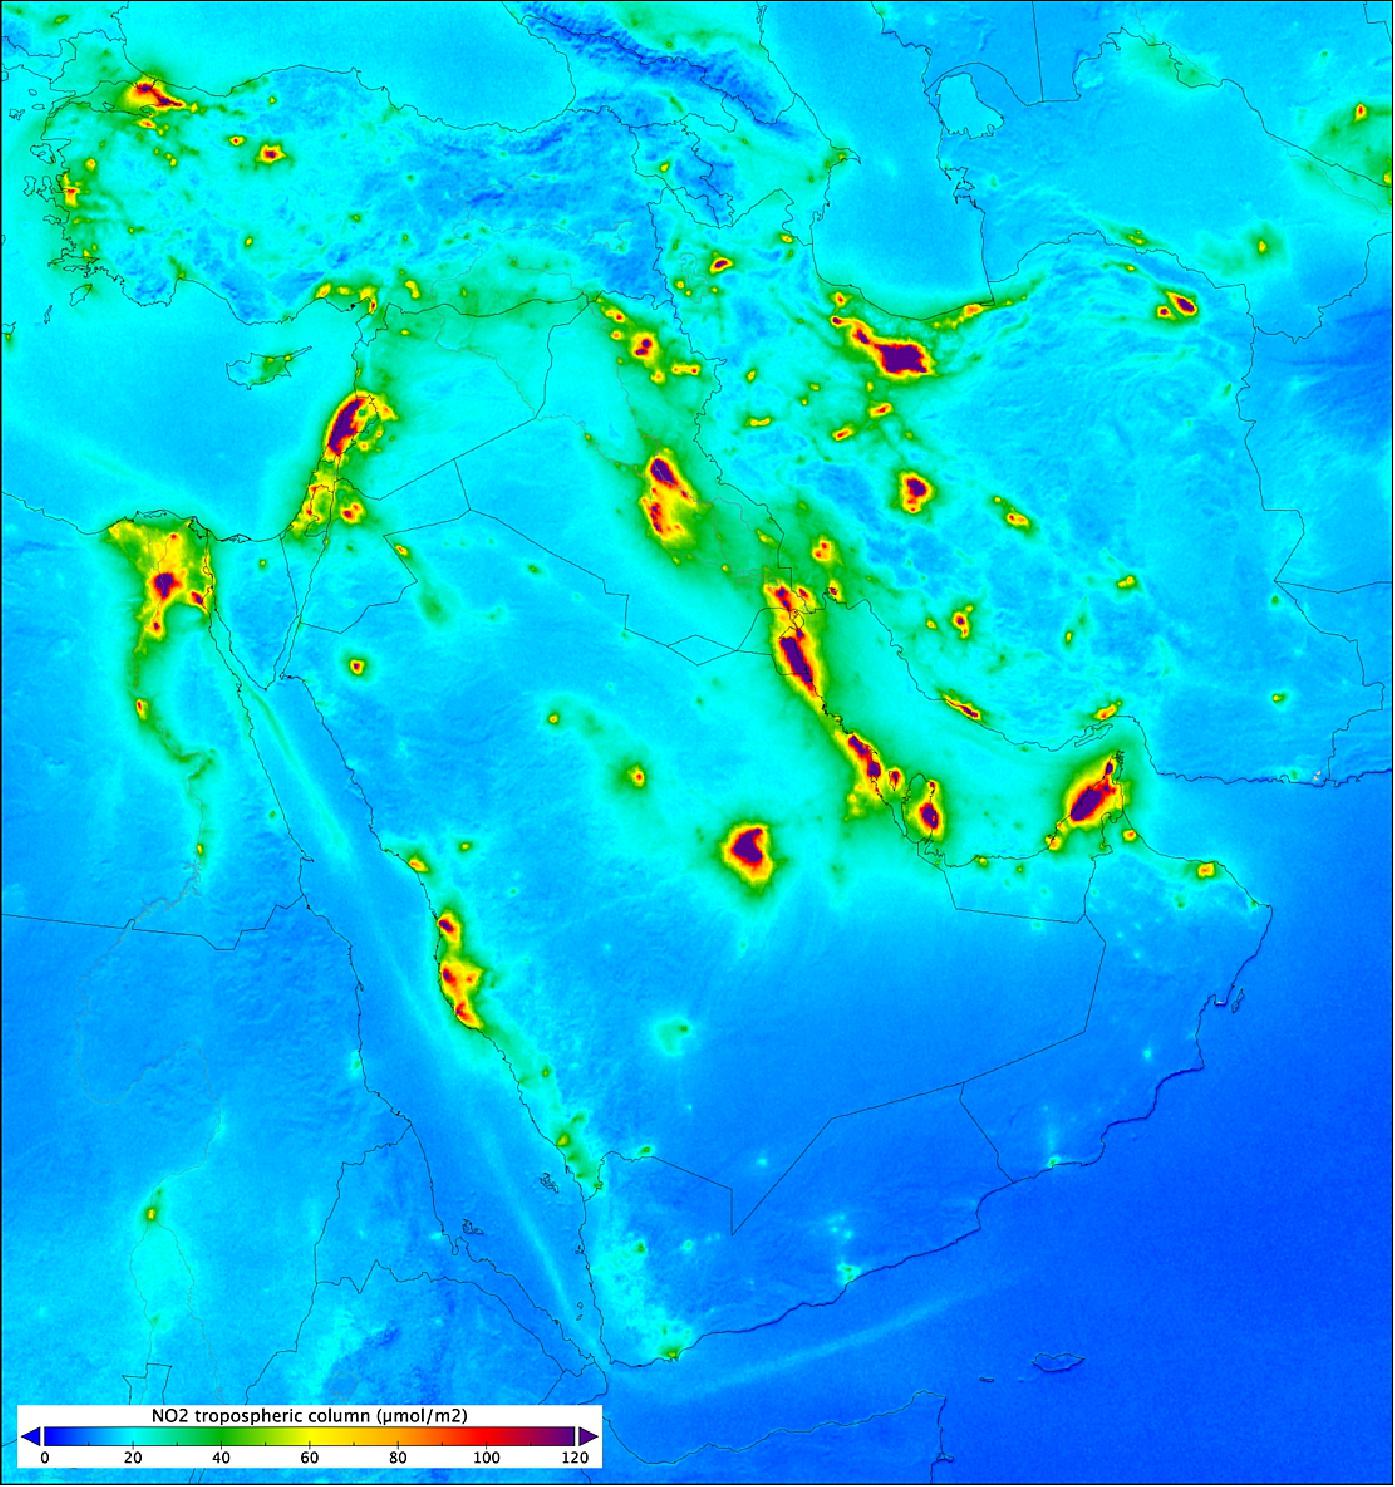 Figure 16: Nitrogen dioxide levels over the Middle East: Based on measurements gathered by the Copernicus Sentinel-5P mission between April and September 2018, the image shows high levels of nitrogen dioxide in Cairo, Lebanon, Dubai and other parts of the Middle East. Nitrogen dioxide pollutes the air mainly as a result of traffic and the combustion of fossil fuel in industrial processes. It has a significant impact on human health, contributing particularly to respiratory problems (image credit: ESA, the image contains modified Copernicus data (2018), processed by KNMI)